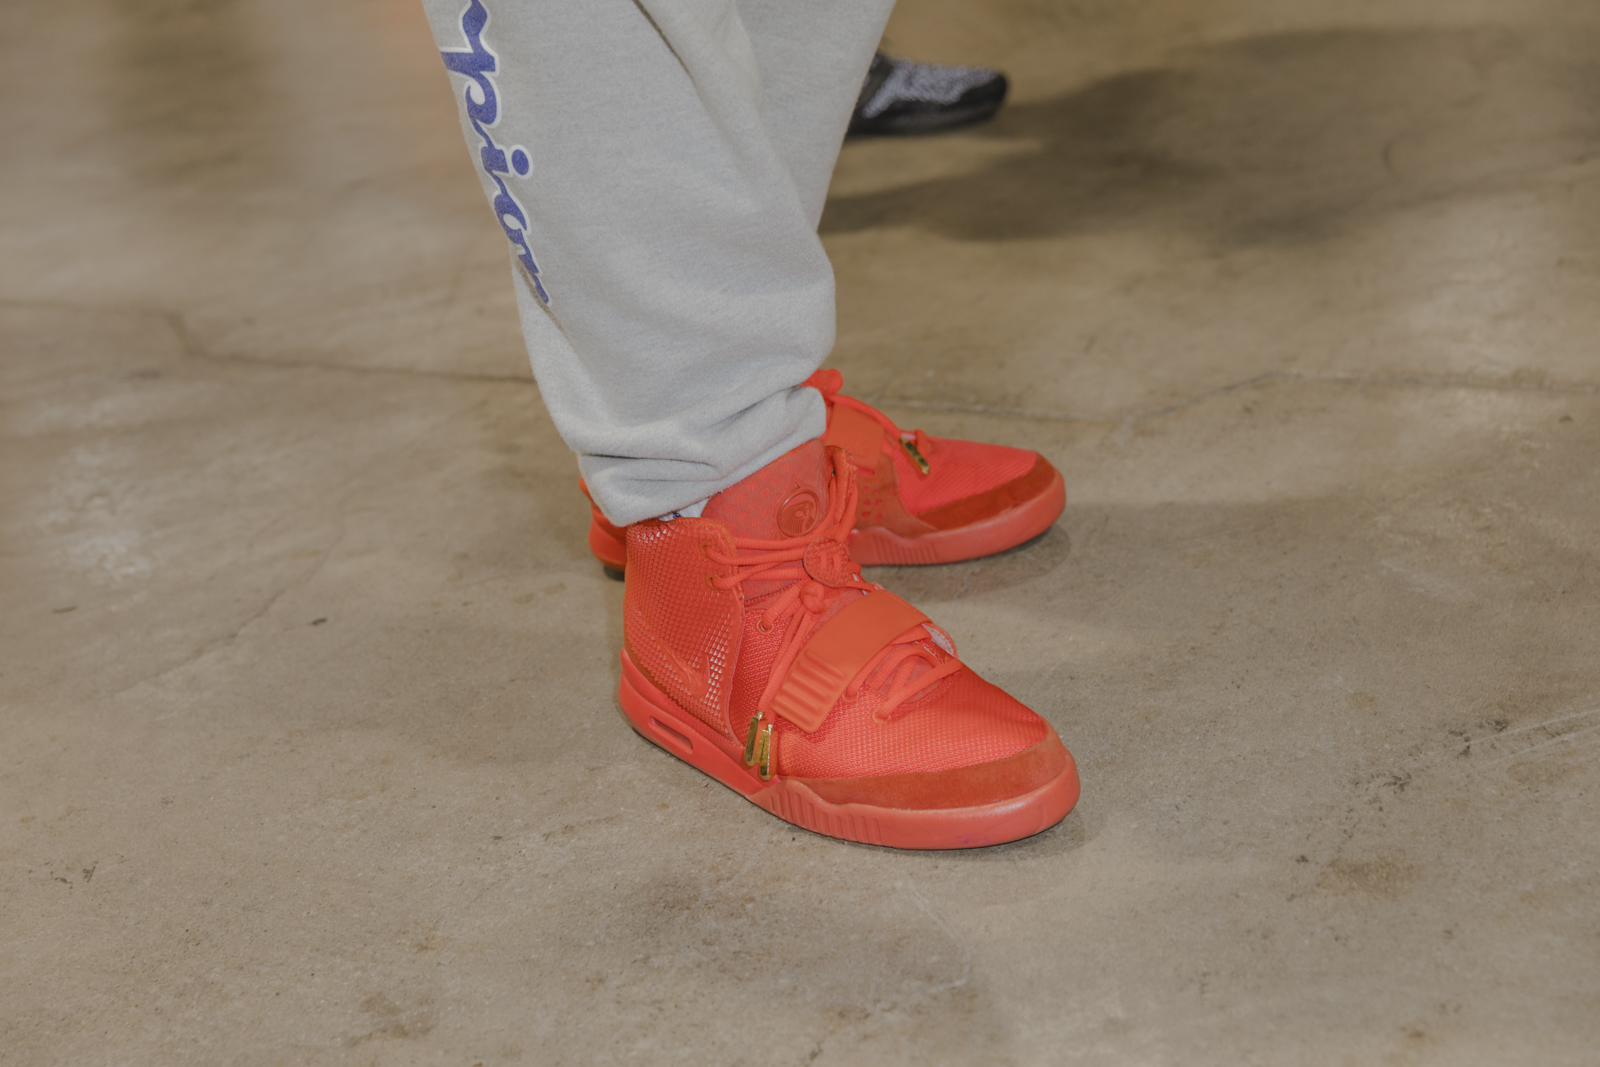 Best Sneakers at ComplexCon 2019 Nike Air YEezy 2 &#x27;Red October&#x27;